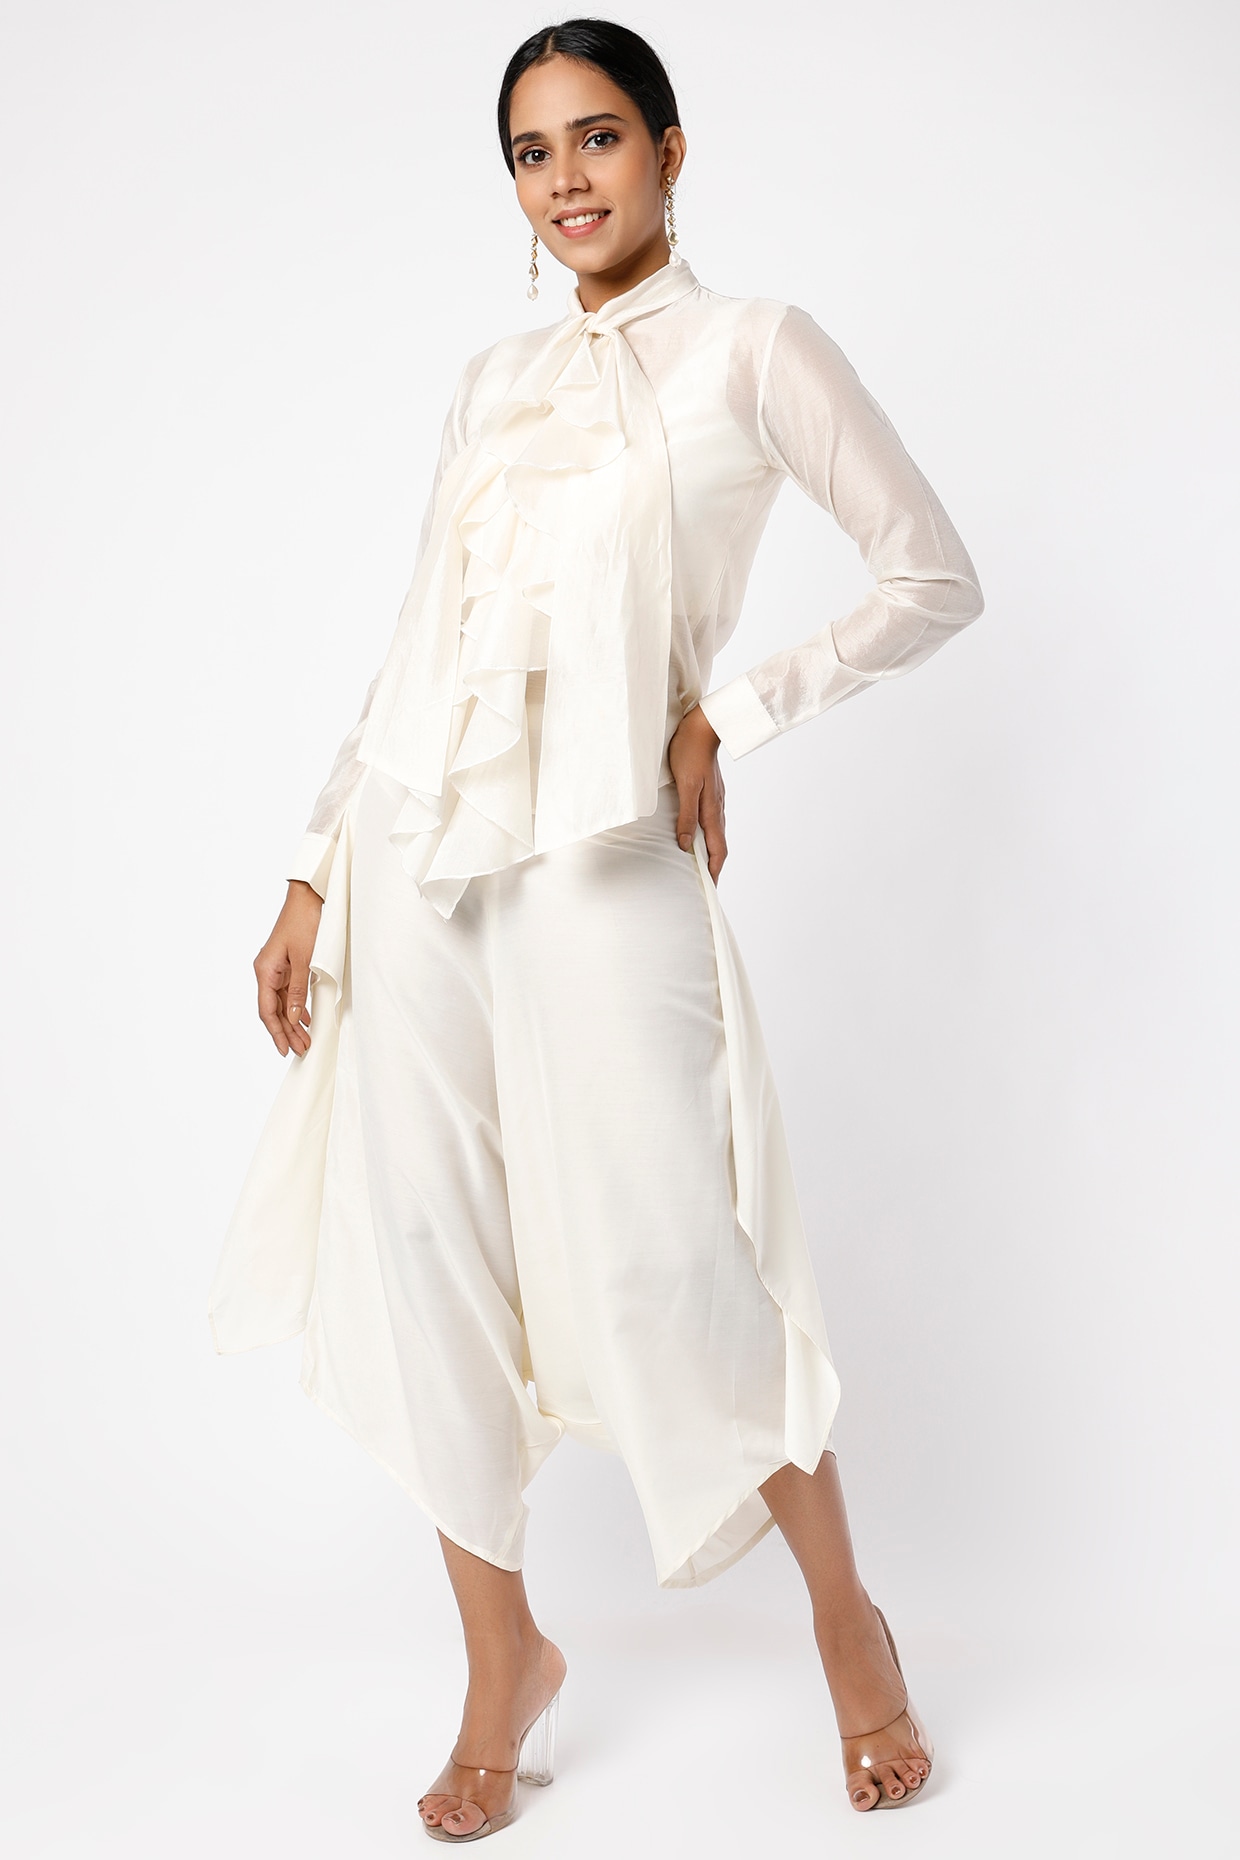 Off White Dhoti - Buy Off White Dhoti online in India